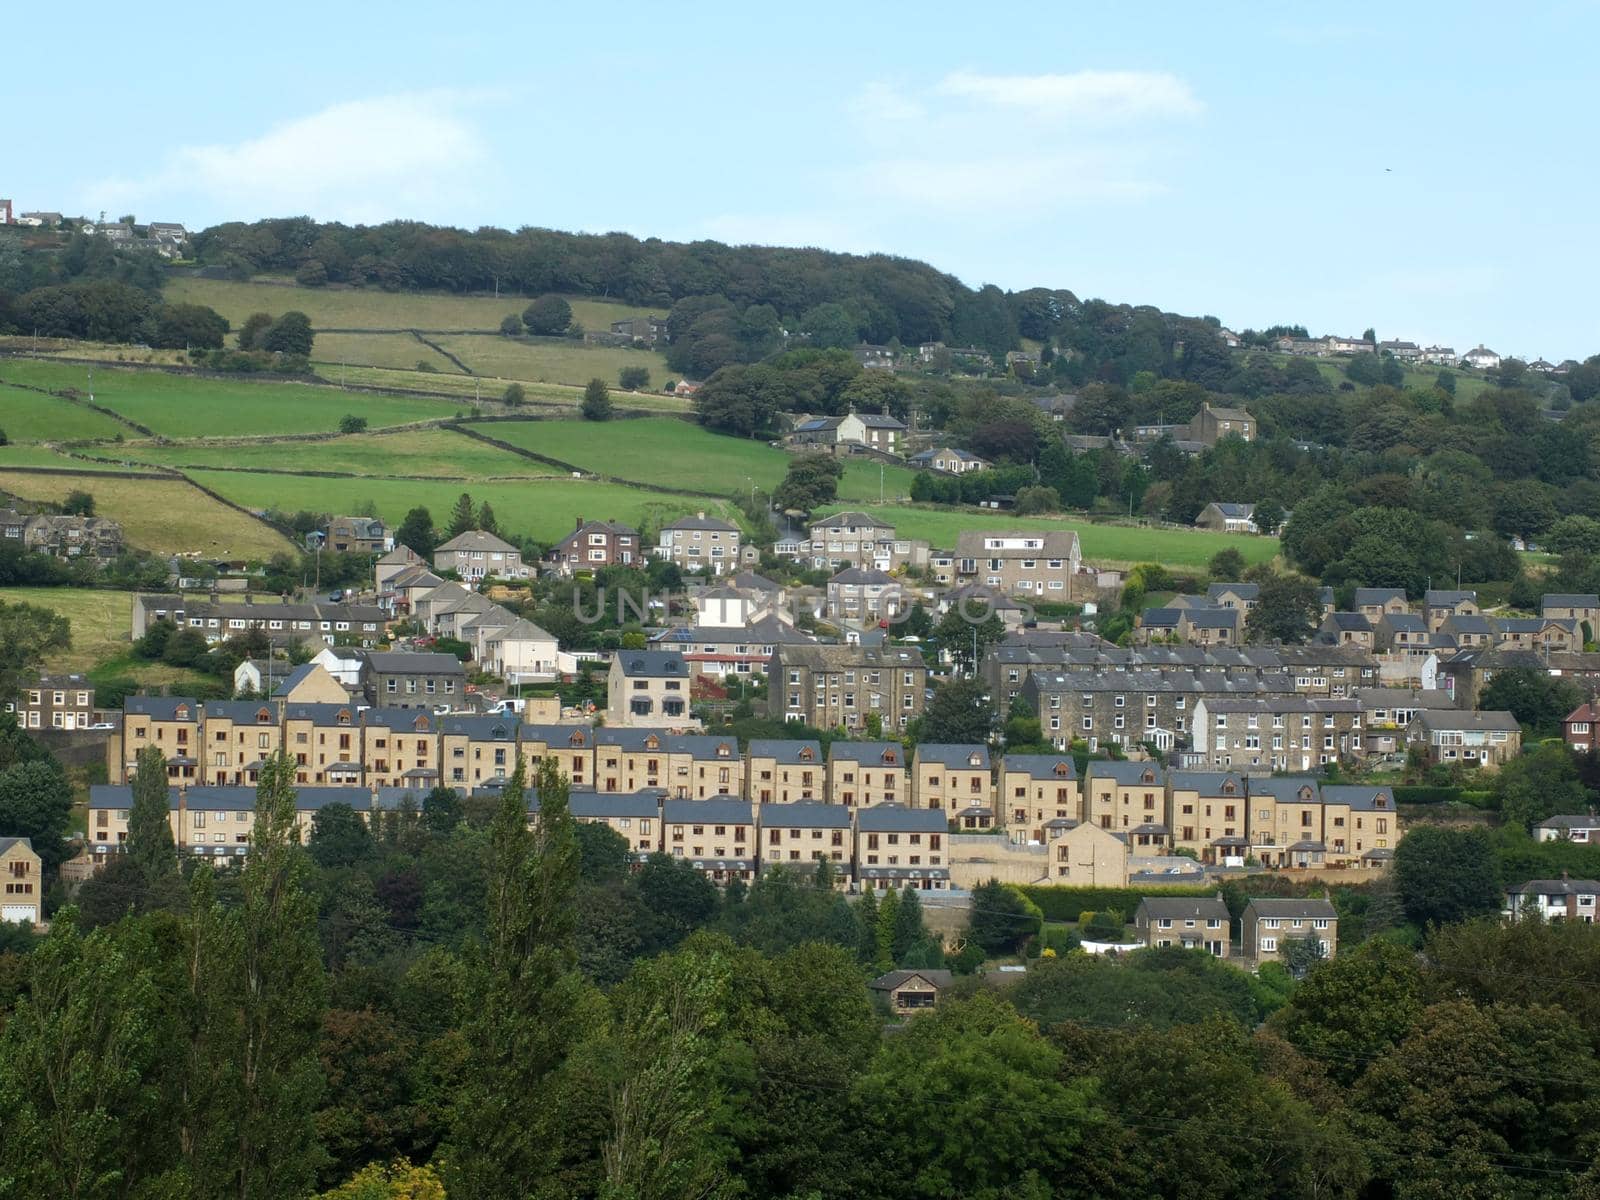 row of modern houses build on a hillside surrounded by older buildings in sowerby bridge west yorkshire by philopenshaw